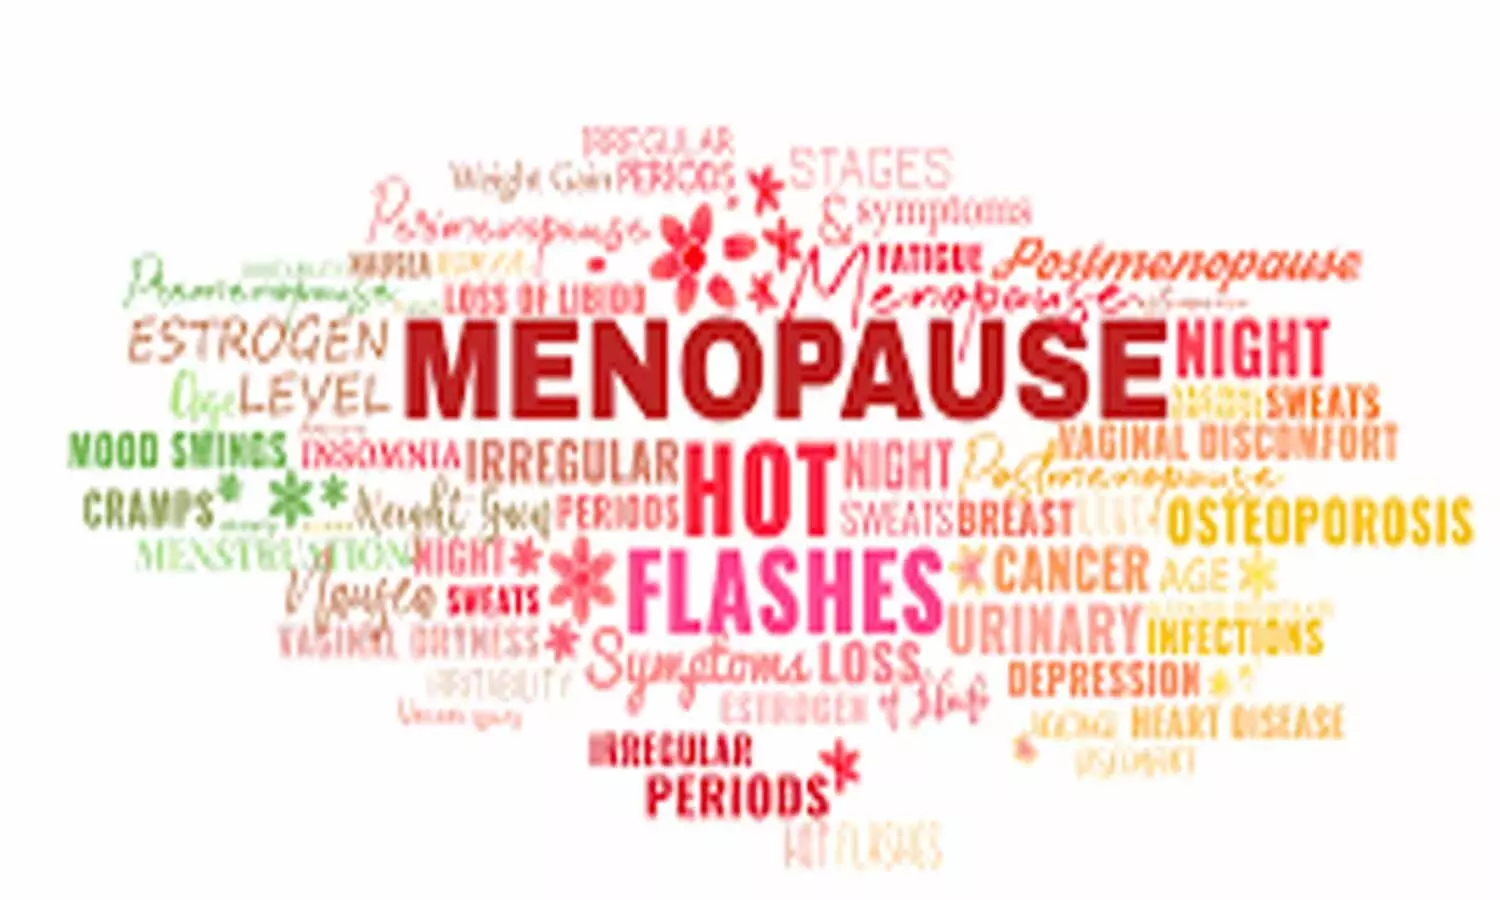 Exposure to environmental chemicals linked to sleep disruption during menopause